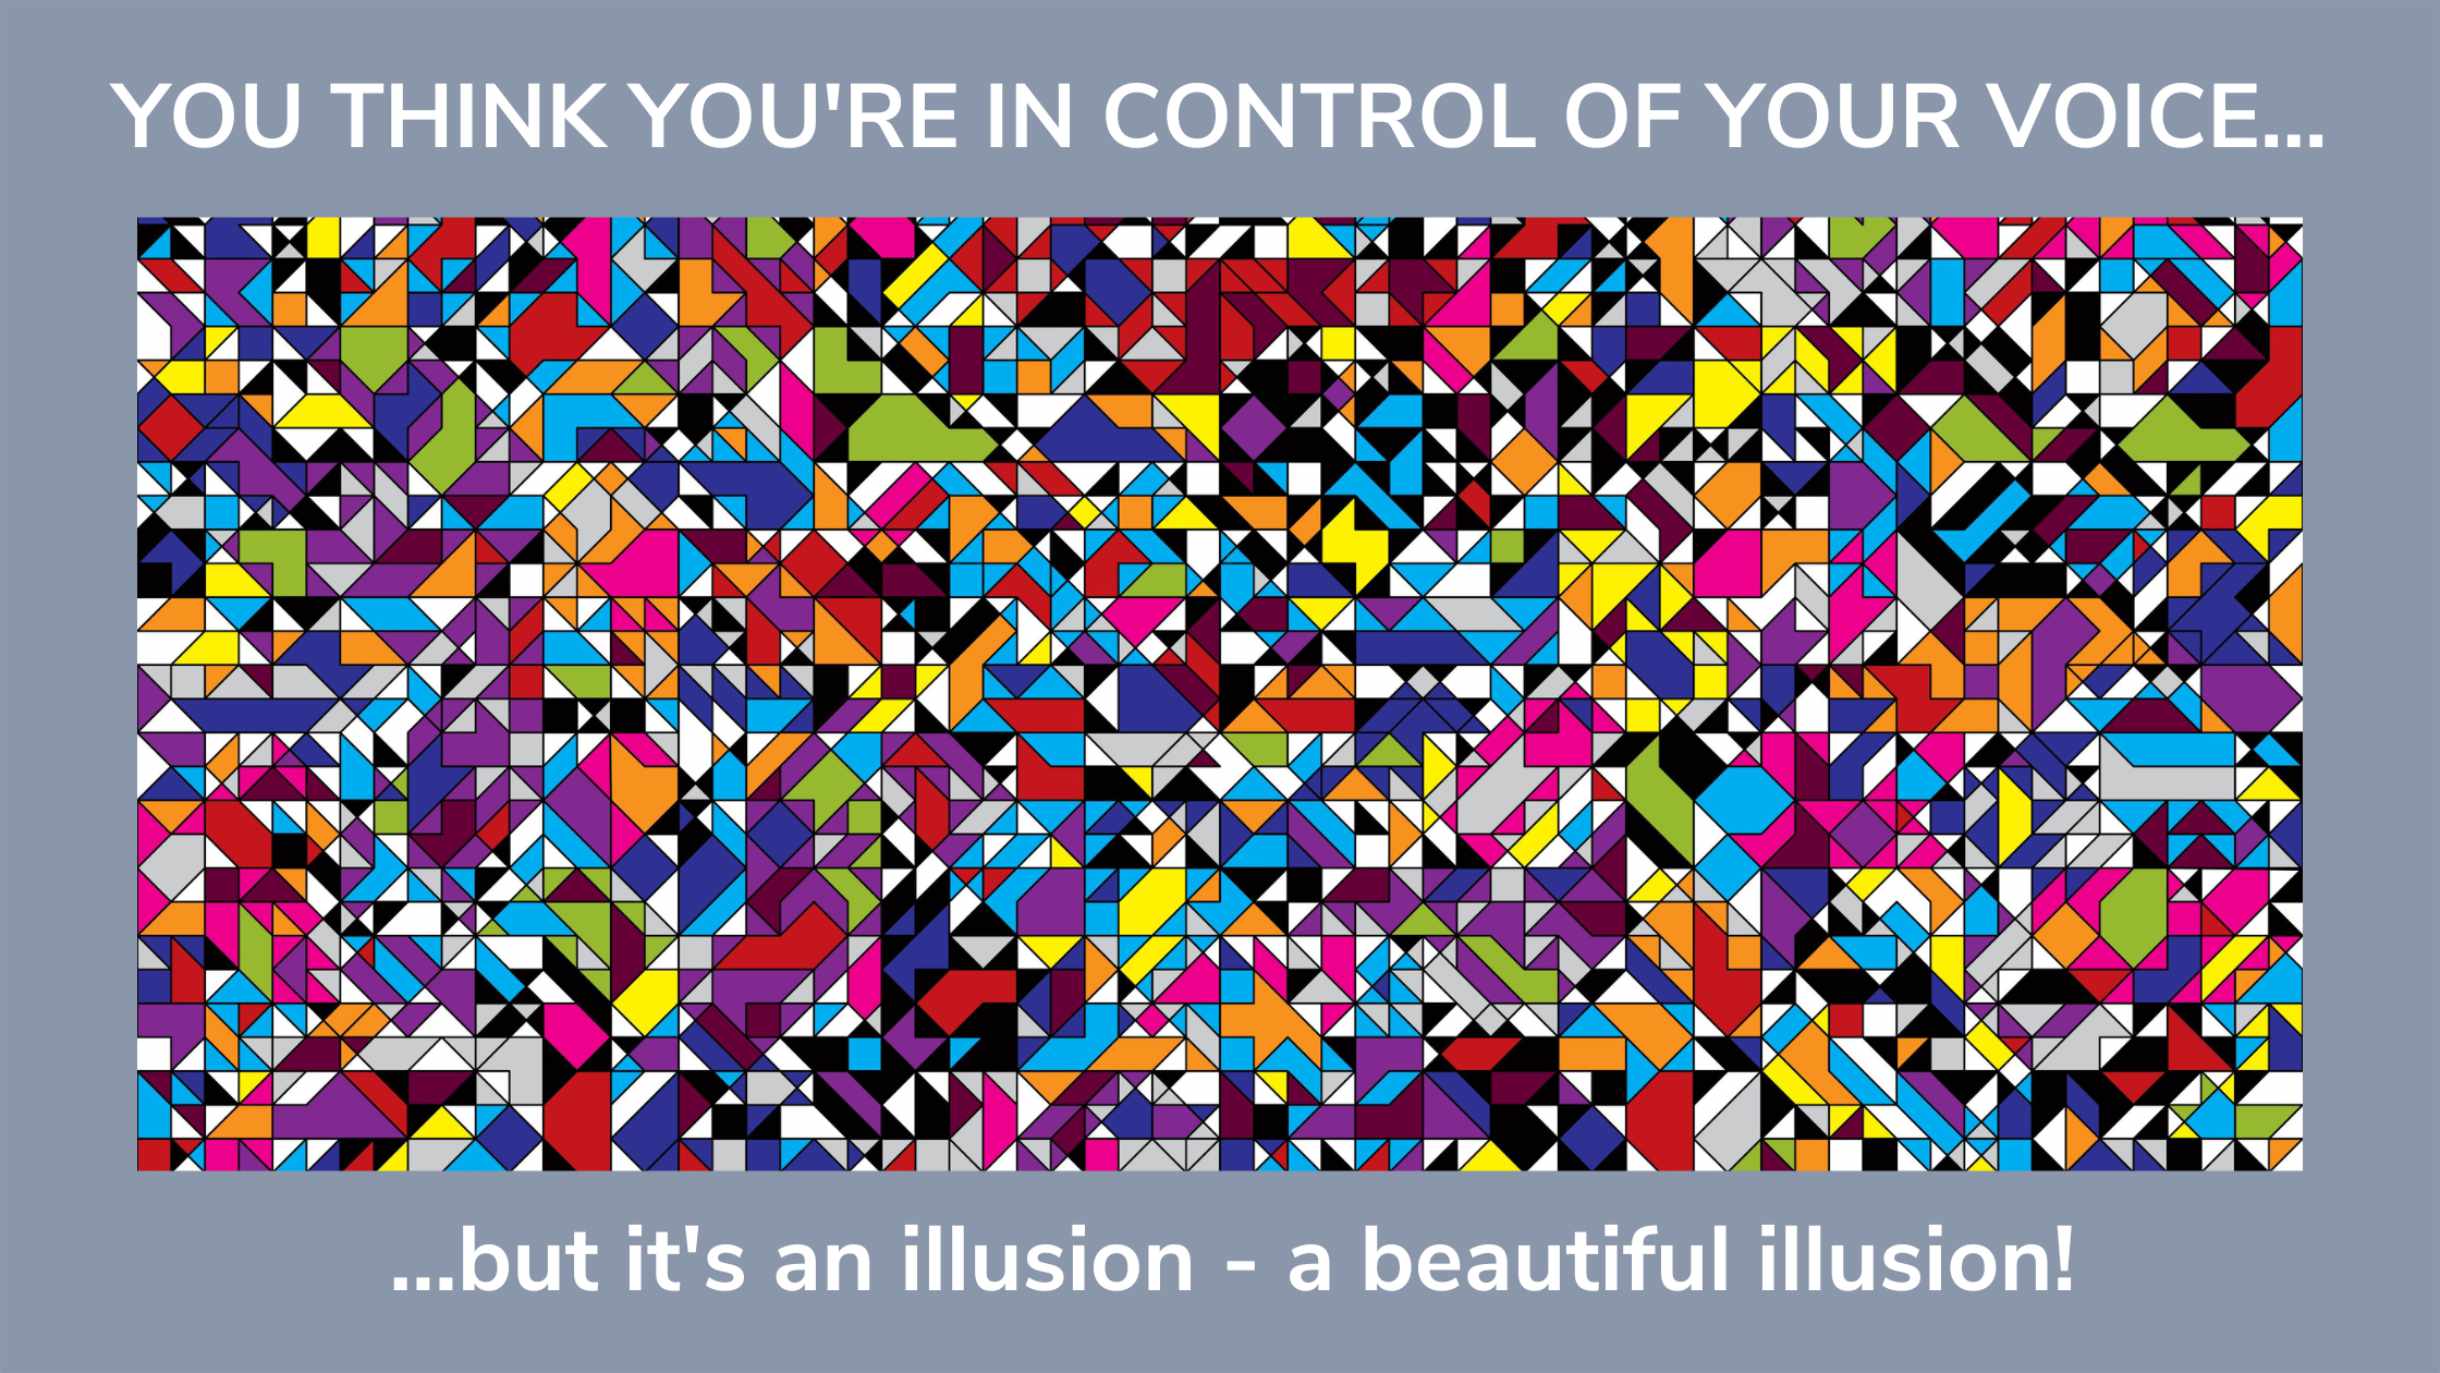 A mosaic image of colors and shapes that depict the blog title, "You think you're in control of your voice... but it's an illusion - a beautiful illusion!"